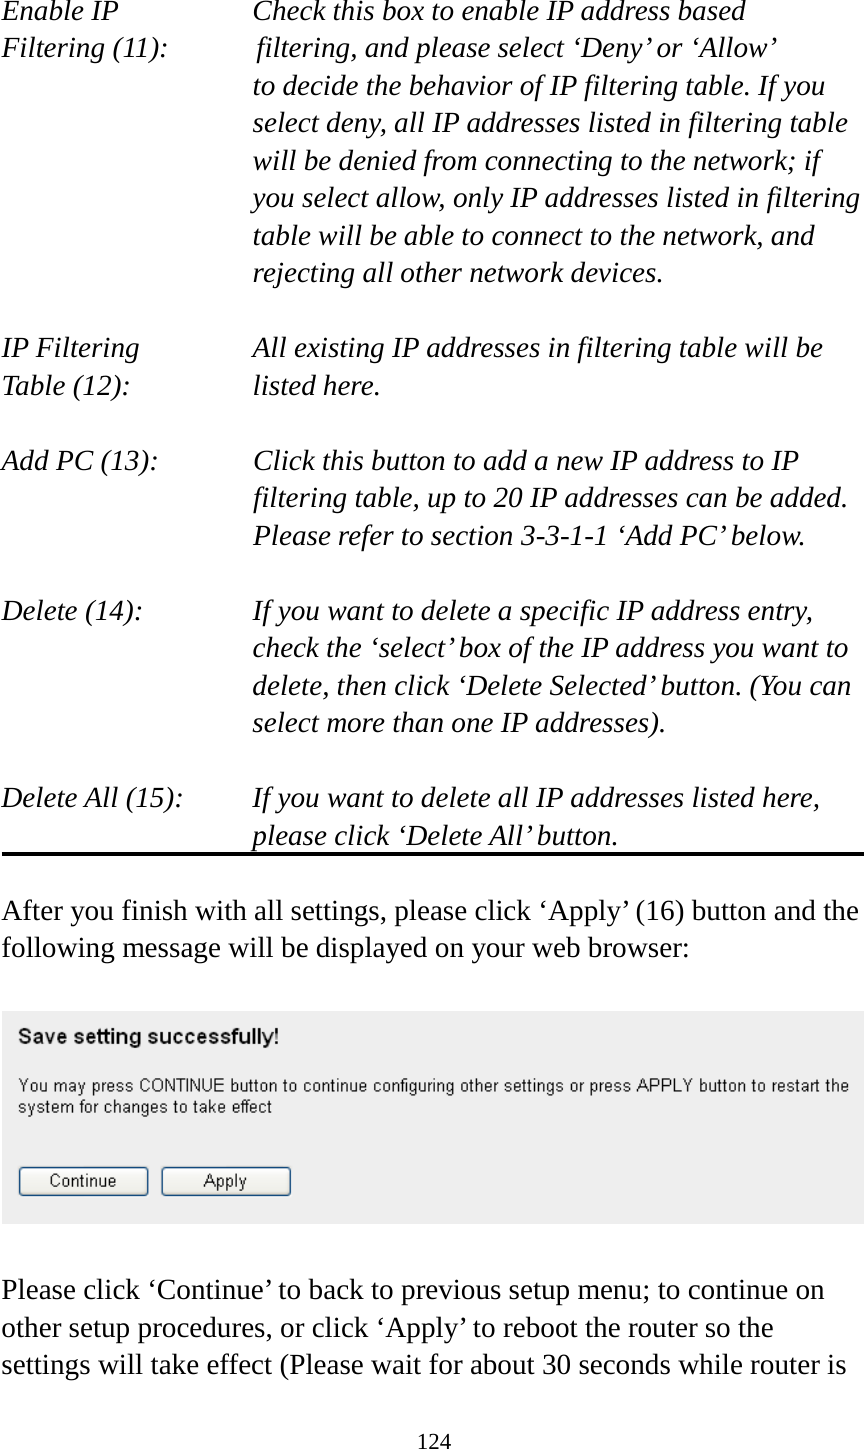 124  Enable IP        Check this box to enable IP address based Filtering (11):      filtering, and please select ‘Deny’ or ‘Allow’   to decide the behavior of IP filtering table. If you select deny, all IP addresses listed in filtering table will be denied from connecting to the network; if you select allow, only IP addresses listed in filtering table will be able to connect to the network, and rejecting all other network devices.  IP Filtering      All existing IP addresses in filtering table will be Table (12):       listed here.  Add PC (13):    Click this button to add a new IP address to IP filtering table, up to 20 IP addresses can be added.  Please refer to section 3-3-1-1 ‘Add PC’ below.    Delete (14):      If you want to delete a specific IP address entry,     check the ‘select’ box of the IP address you want to delete, then click ‘Delete Selected’ button. (You can select more than one IP addresses).  Delete All (15):    If you want to delete all IP addresses listed here, please click ‘Delete All’ button.  After you finish with all settings, please click ‘Apply’ (16) button and the following message will be displayed on your web browser:    Please click ‘Continue’ to back to previous setup menu; to continue on other setup procedures, or click ‘Apply’ to reboot the router so the settings will take effect (Please wait for about 30 seconds while router is 